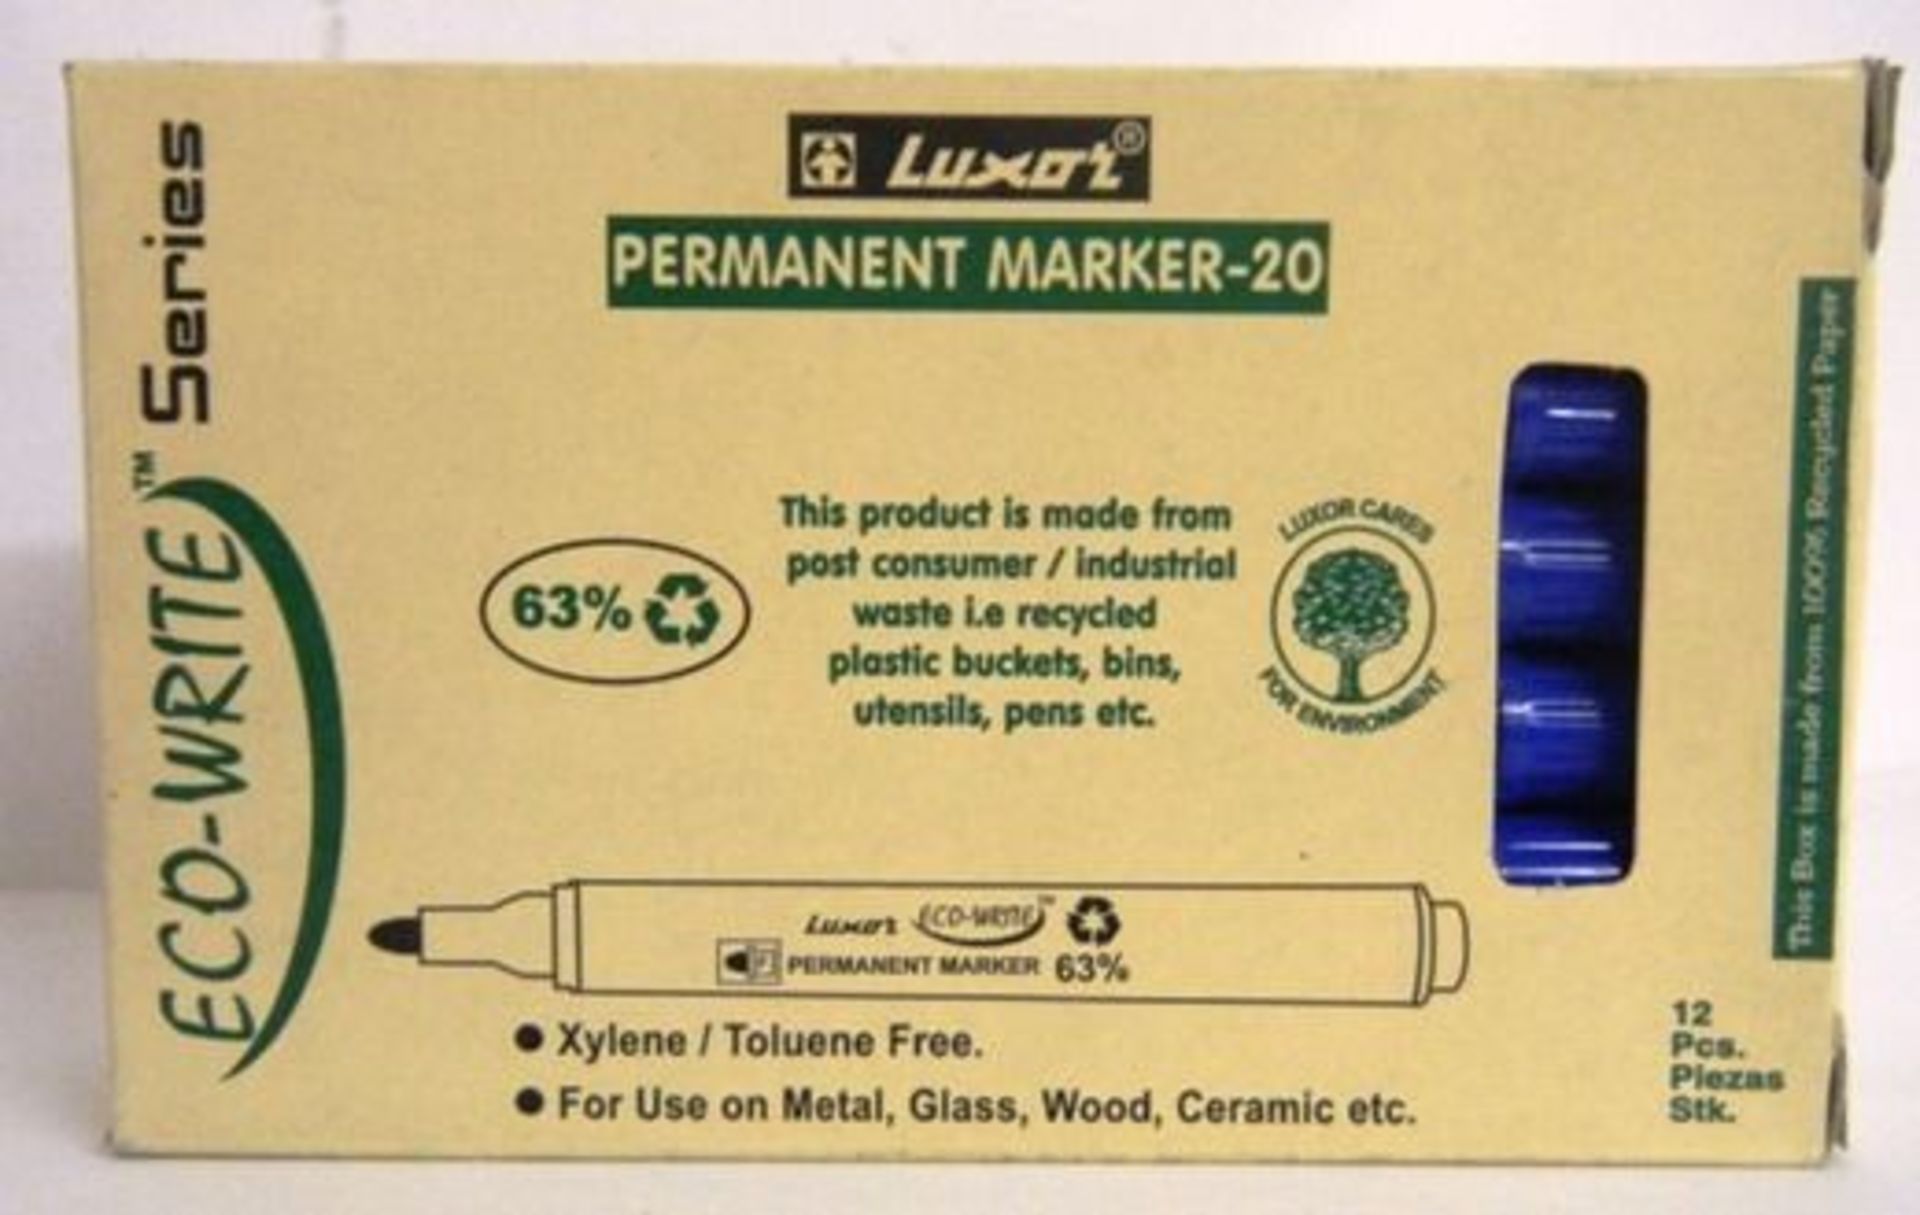 V *TRADE QTY* Brand New 12 Pack Luxor Permanent Marker Pens Blue (Image is different colour) OSP £